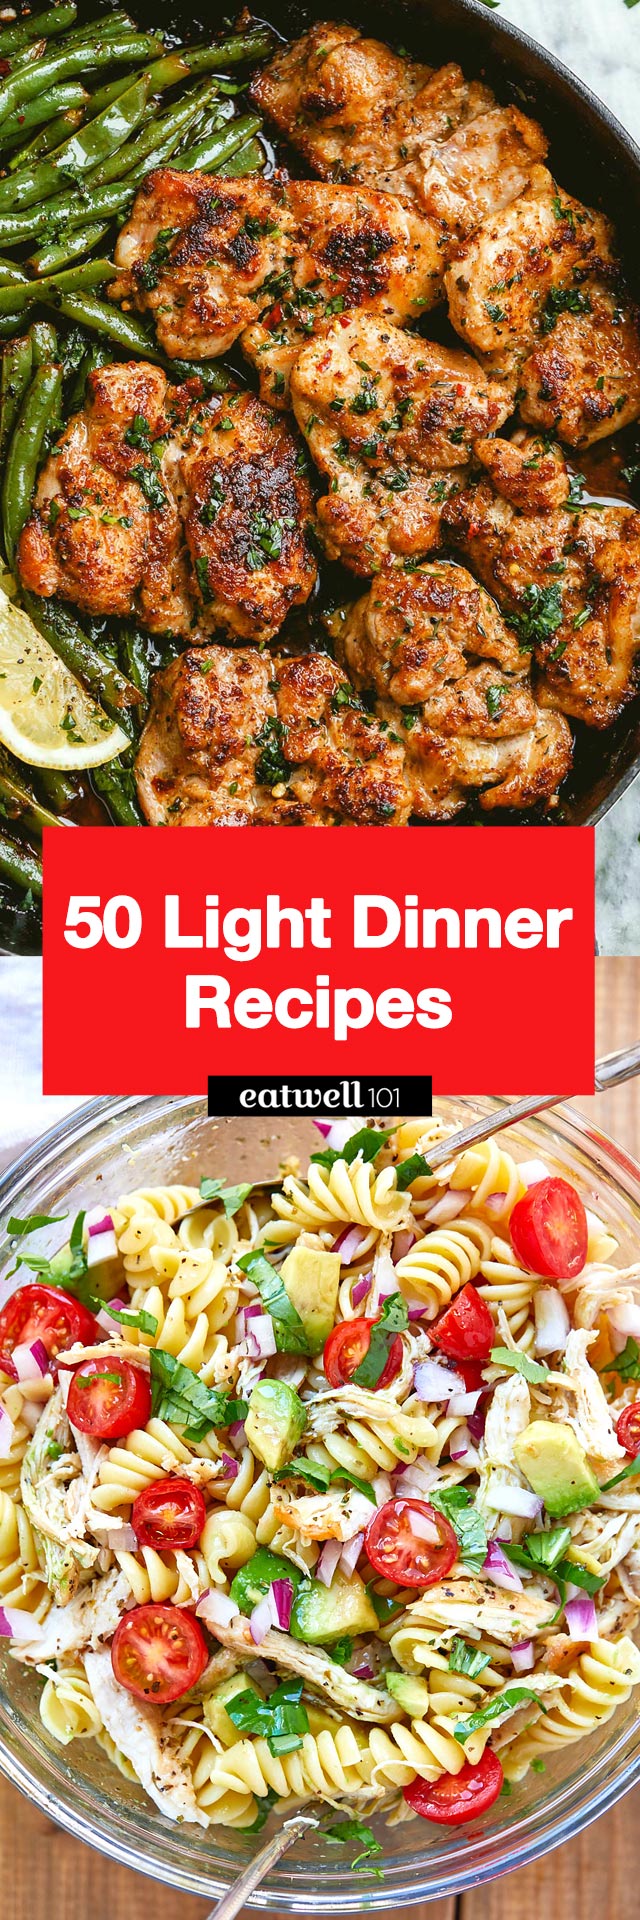 50+ Easy Light Dinner Ideas - #light #dinner #recipes #eatwell101 - These light dinners recipes include our favorite fresh ingredients. Keep your meals lightweight all summer long with these tasty and light dinner recipes!